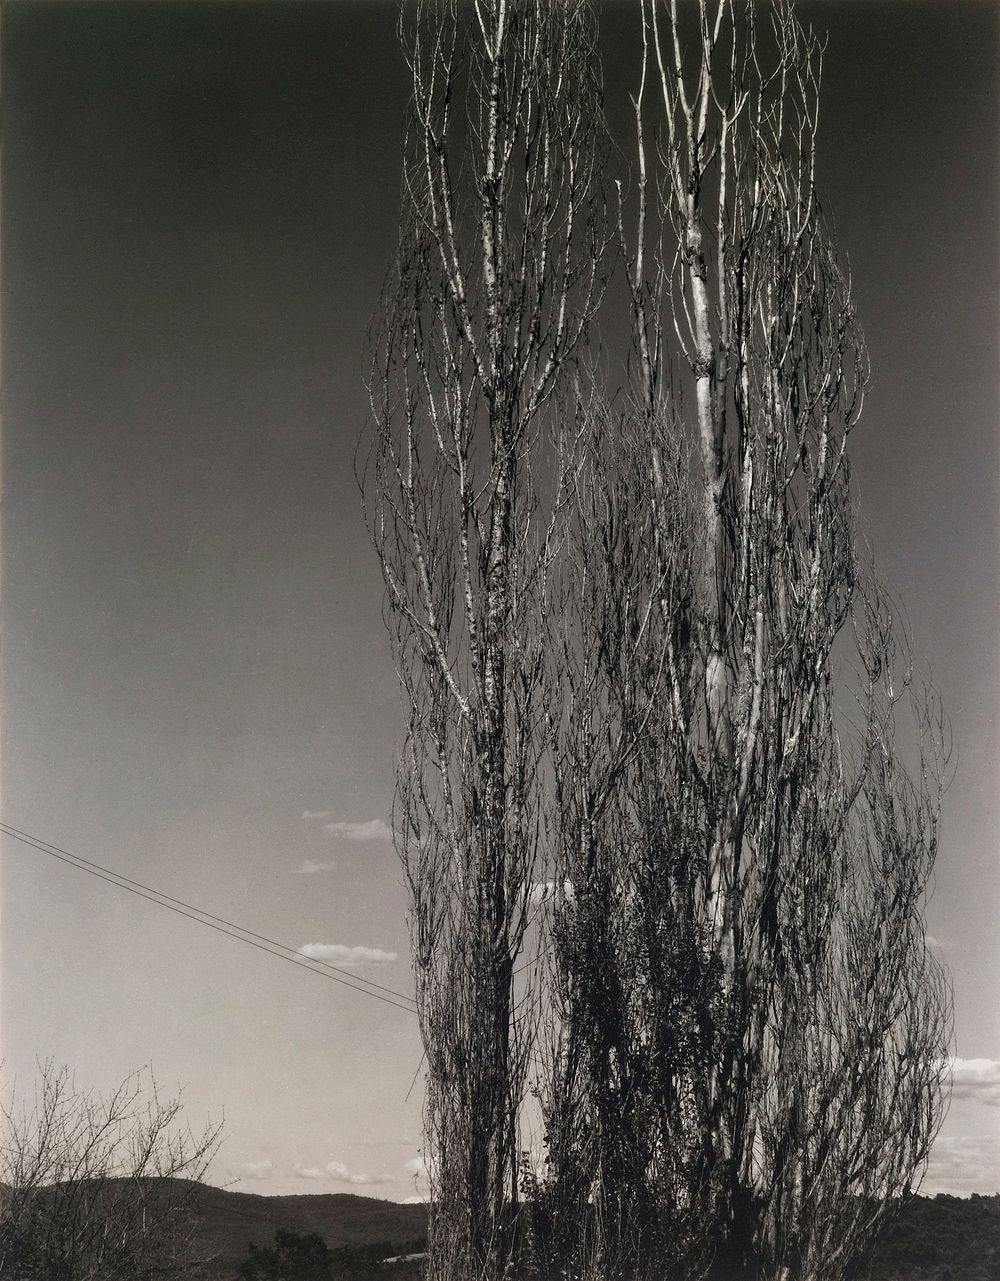 The Two Poplars, Lake George (1934) photo in high resolution by Alfred Stieglitz. Original from the Saint Louis Art Museum.…